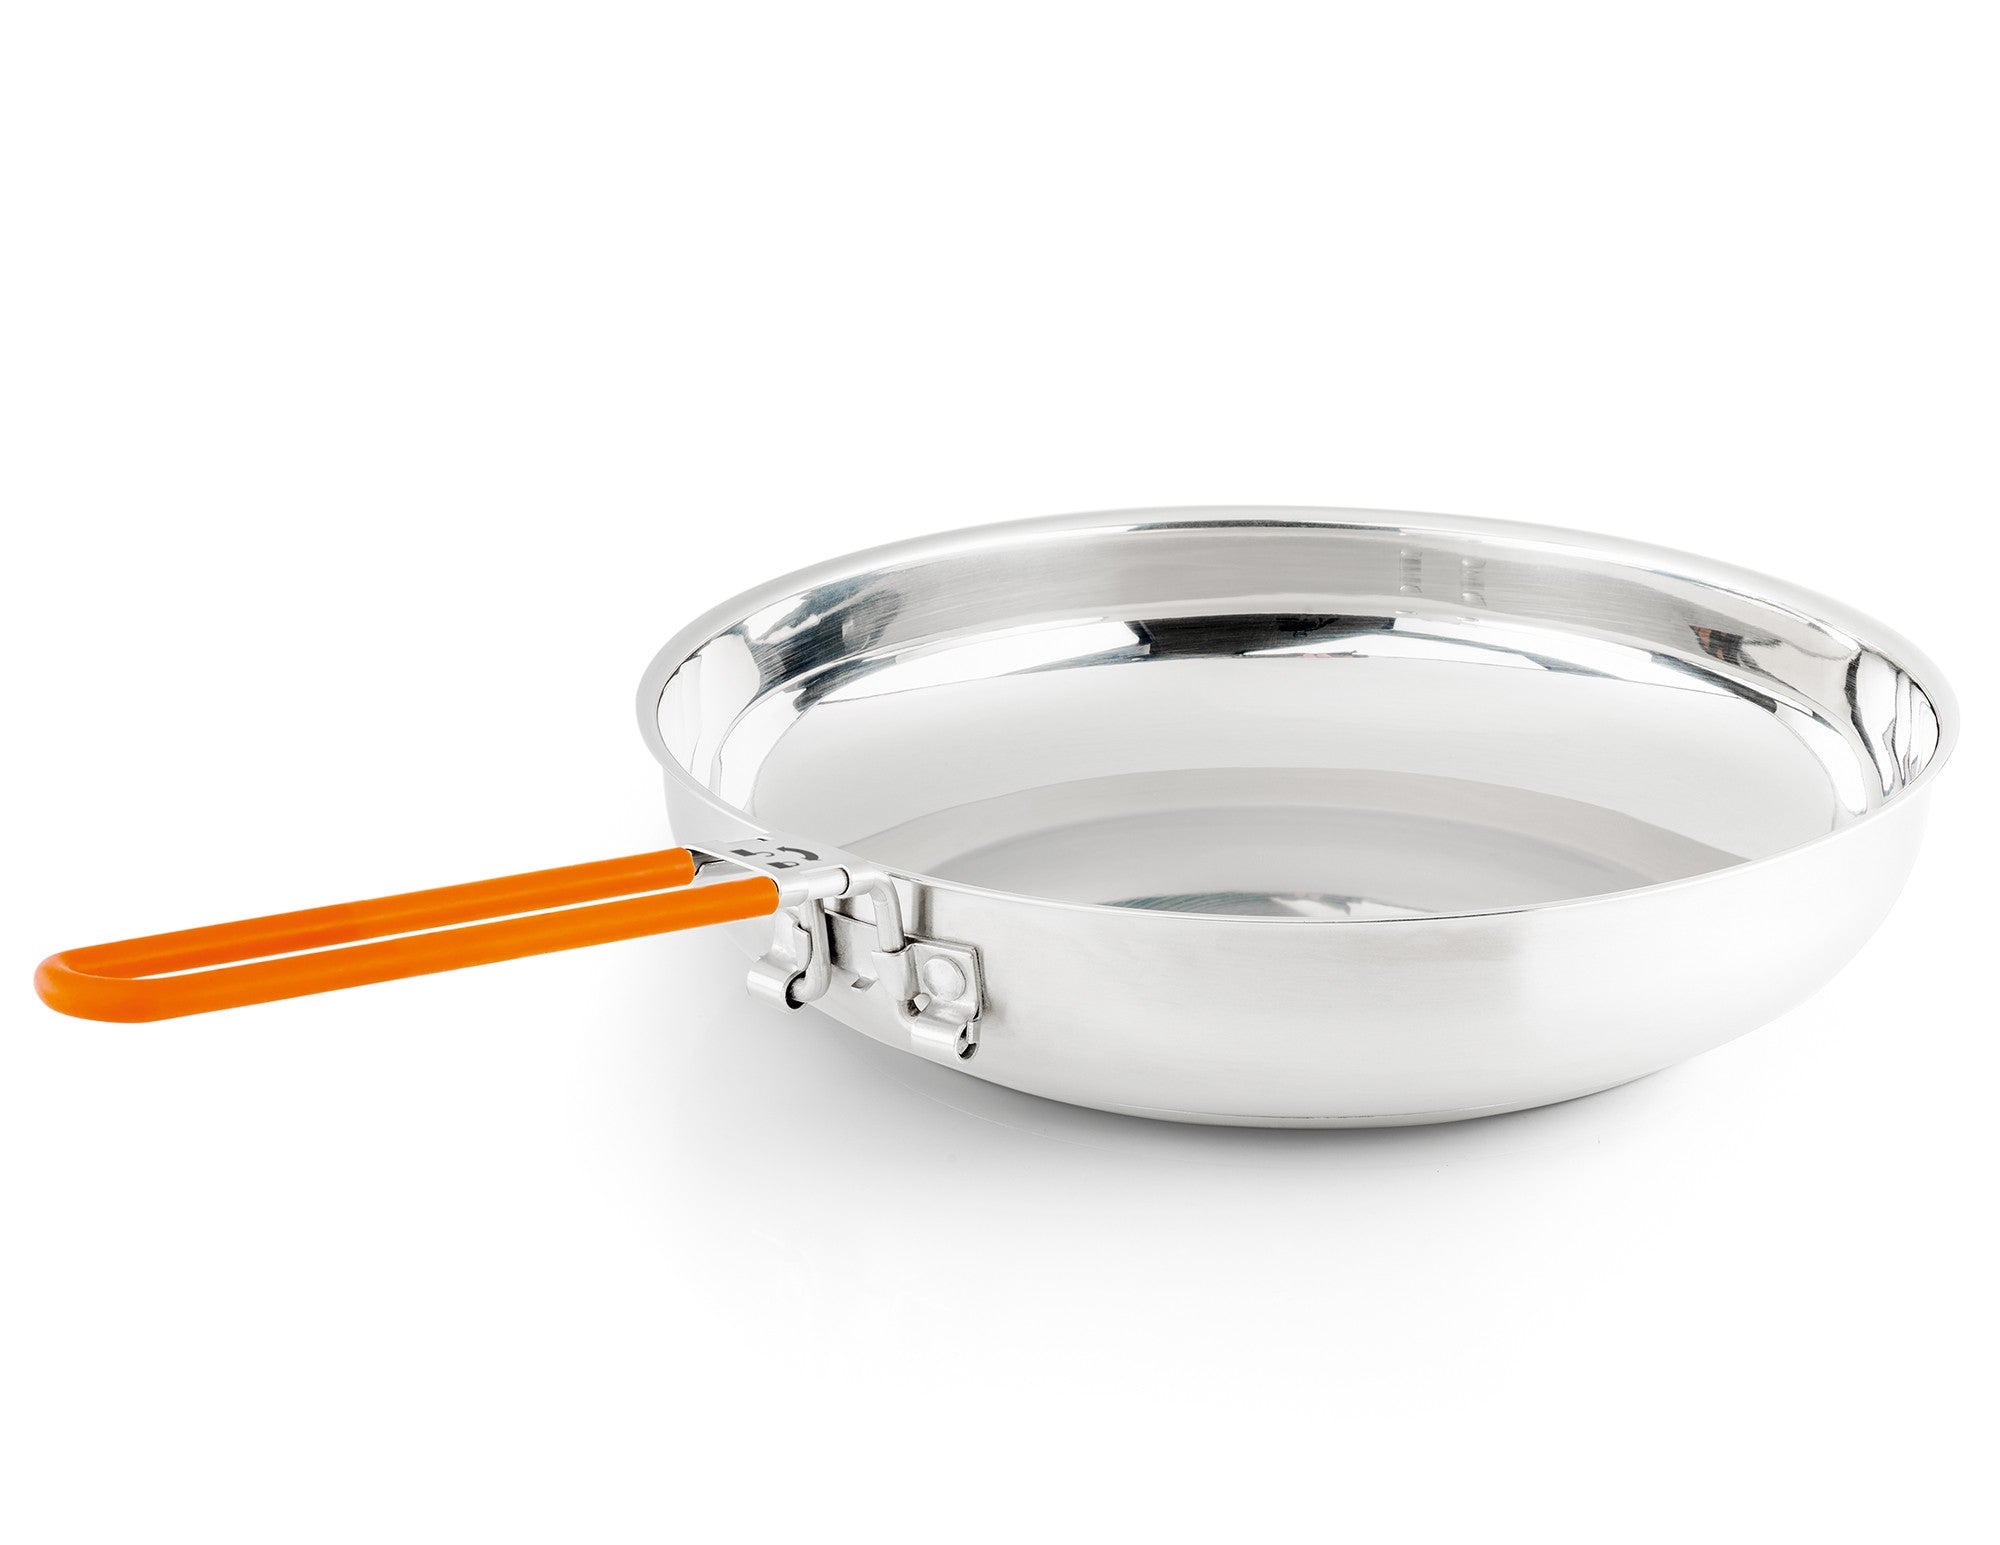 Glacier Stainless 1 Person Mess Kit | GSI Outdoors